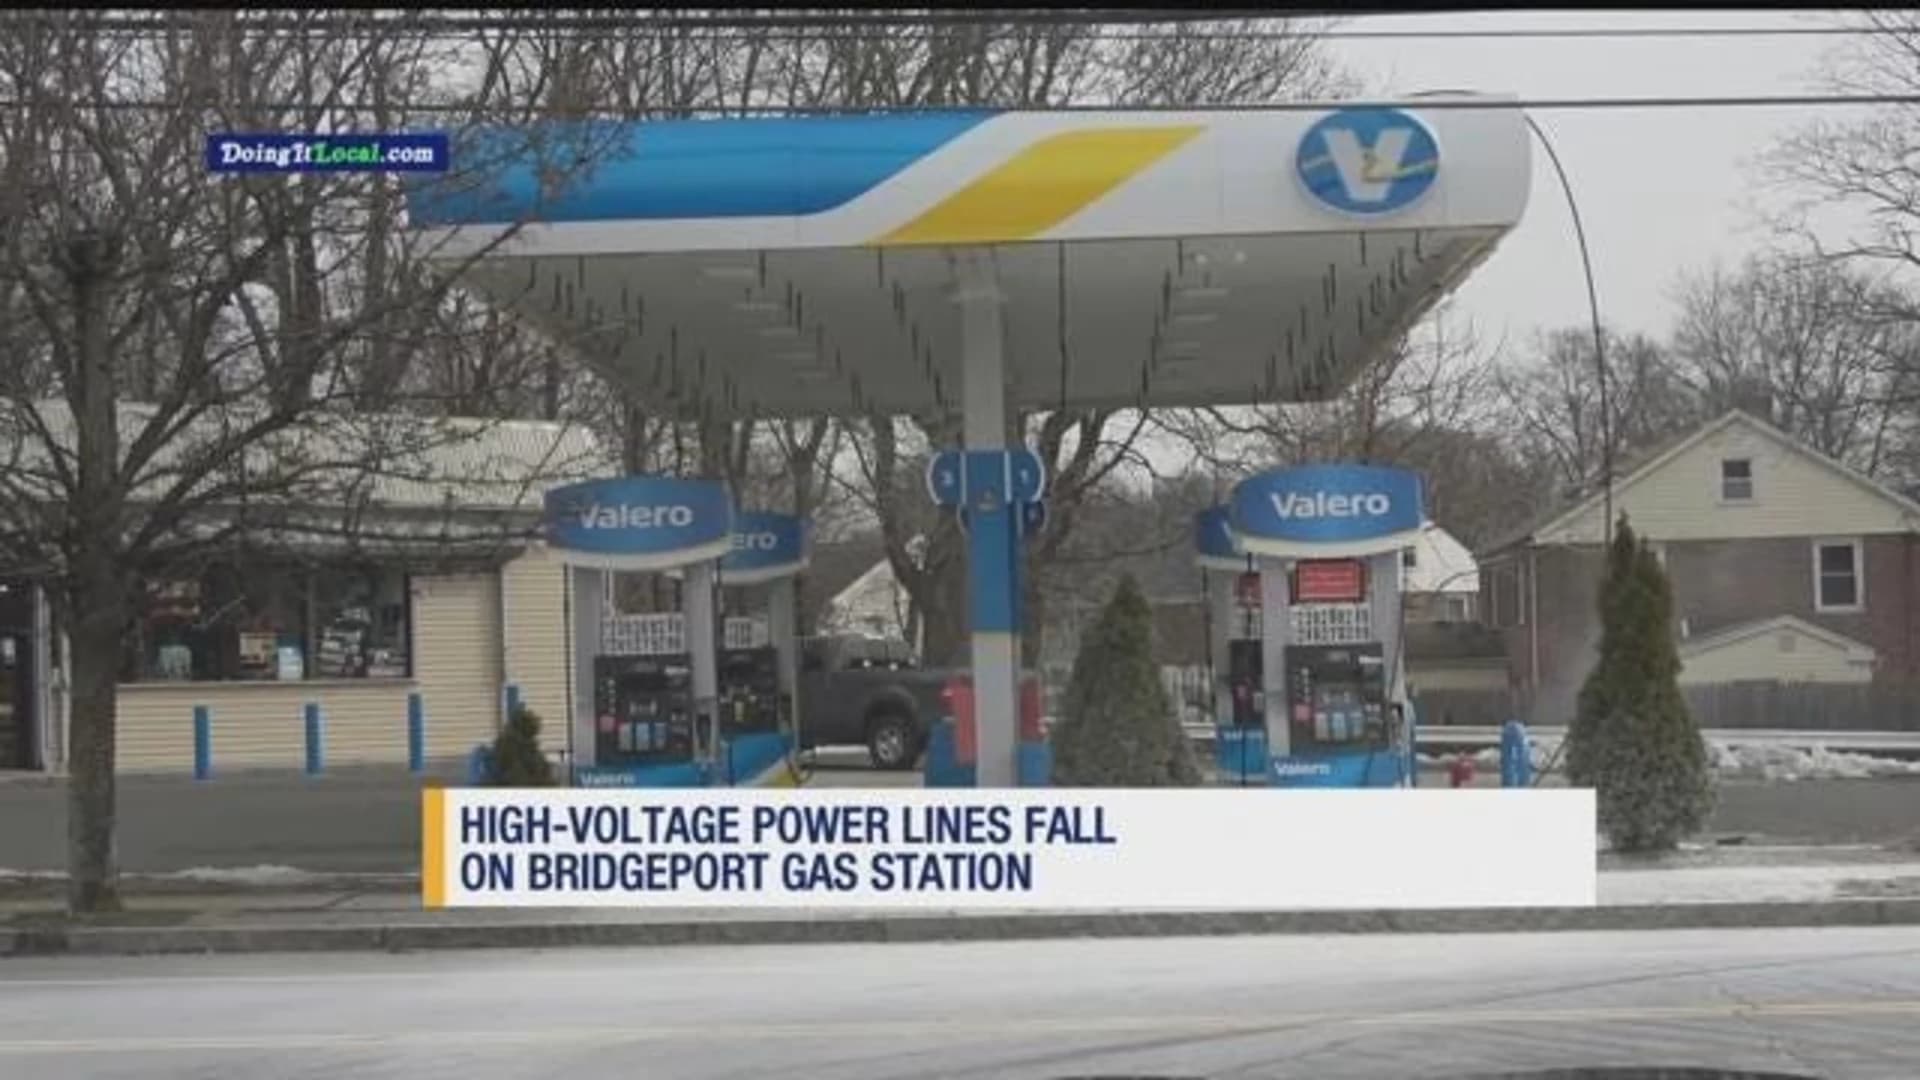 Fire officials: Power lines fall on gas station in Bridgeport